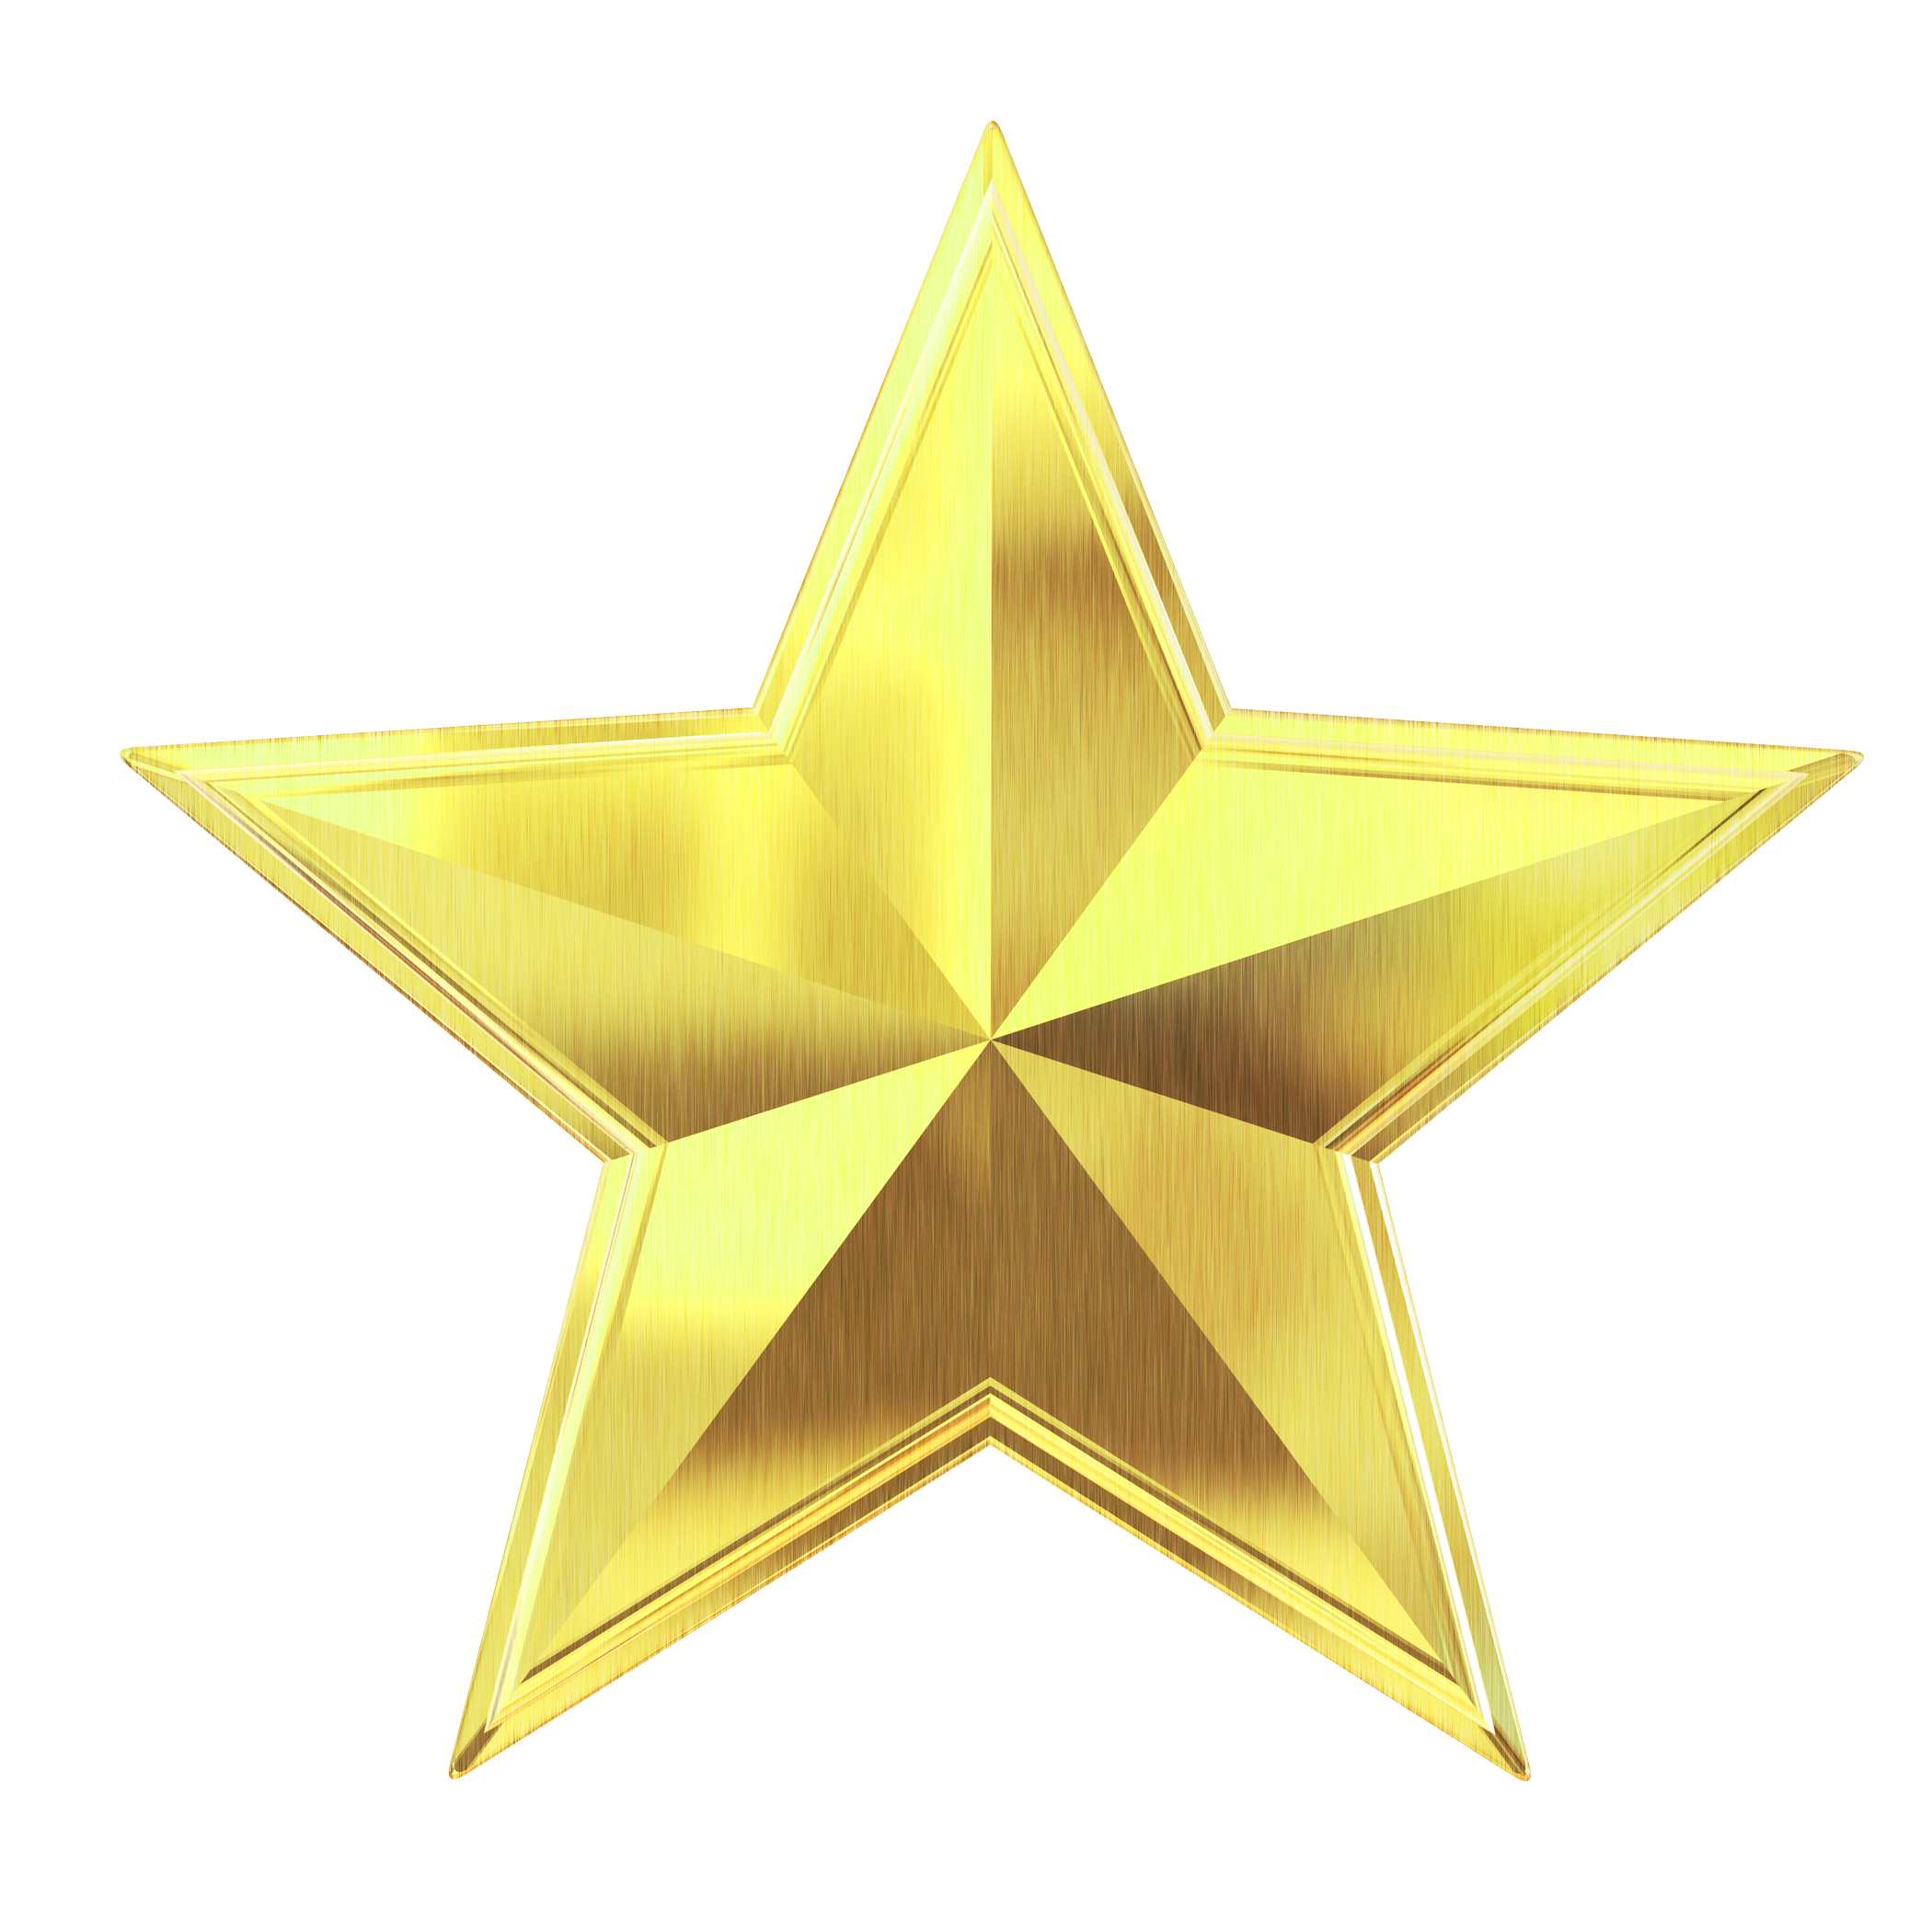 Golden Star PNG Image - PurePNG | Free transparent CC0 PNG Image Library